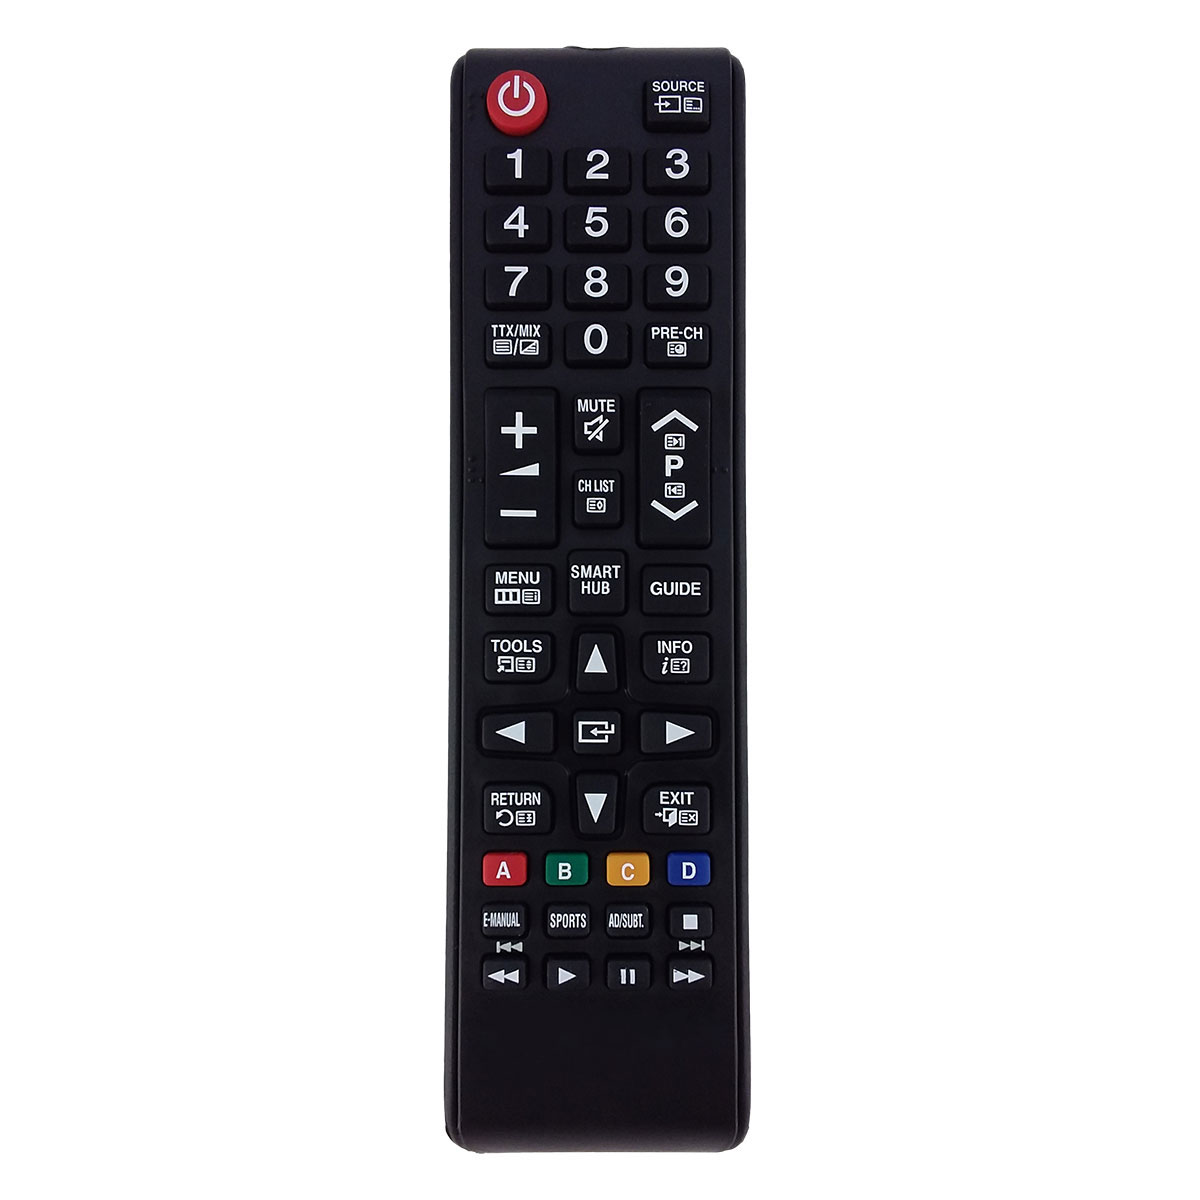 AuraBeam Replacement TV Remote Control for Samsung PN50C680G5FXZA Television